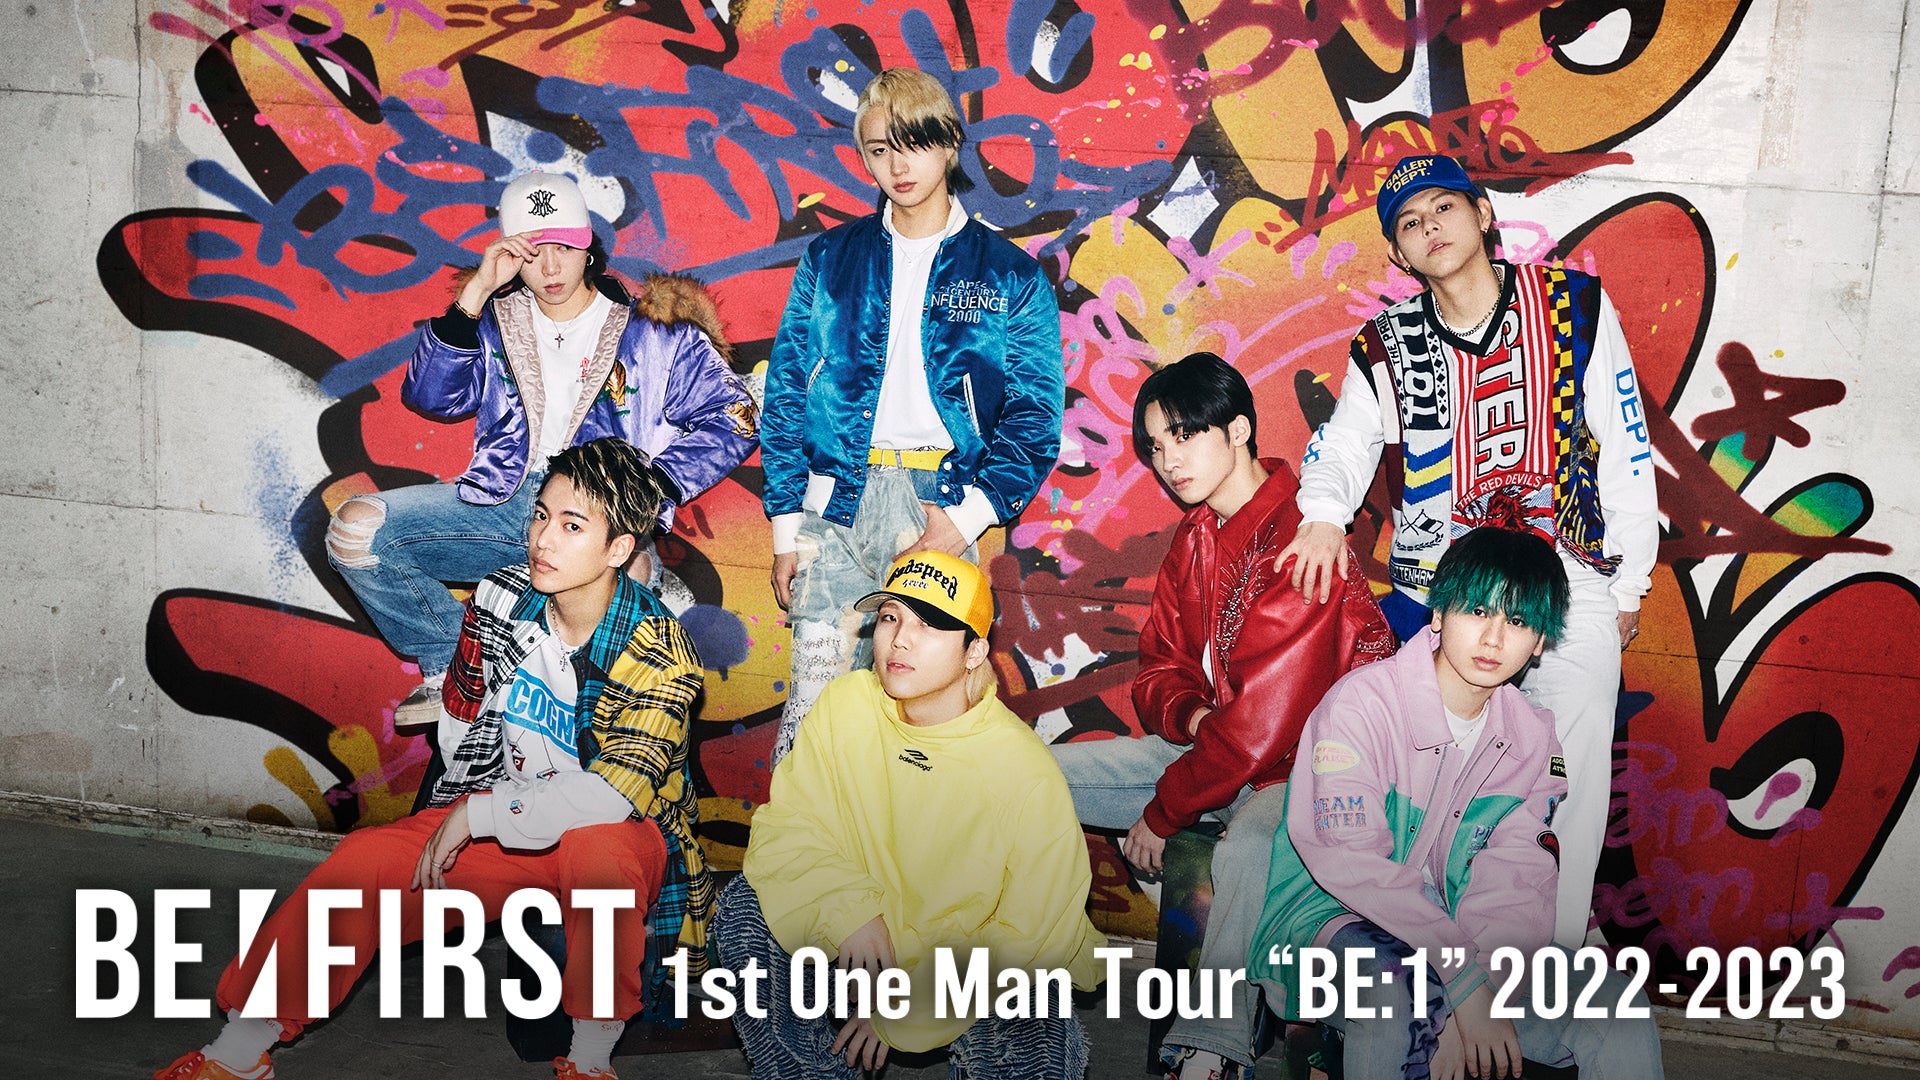 BE:FIRST初の全国ワンマンツアー『BE:FIRST 1st One Man Tour “BE:1” 2022-2023』を「ABEMA PPV ONLINE LIVE」にて配信決定